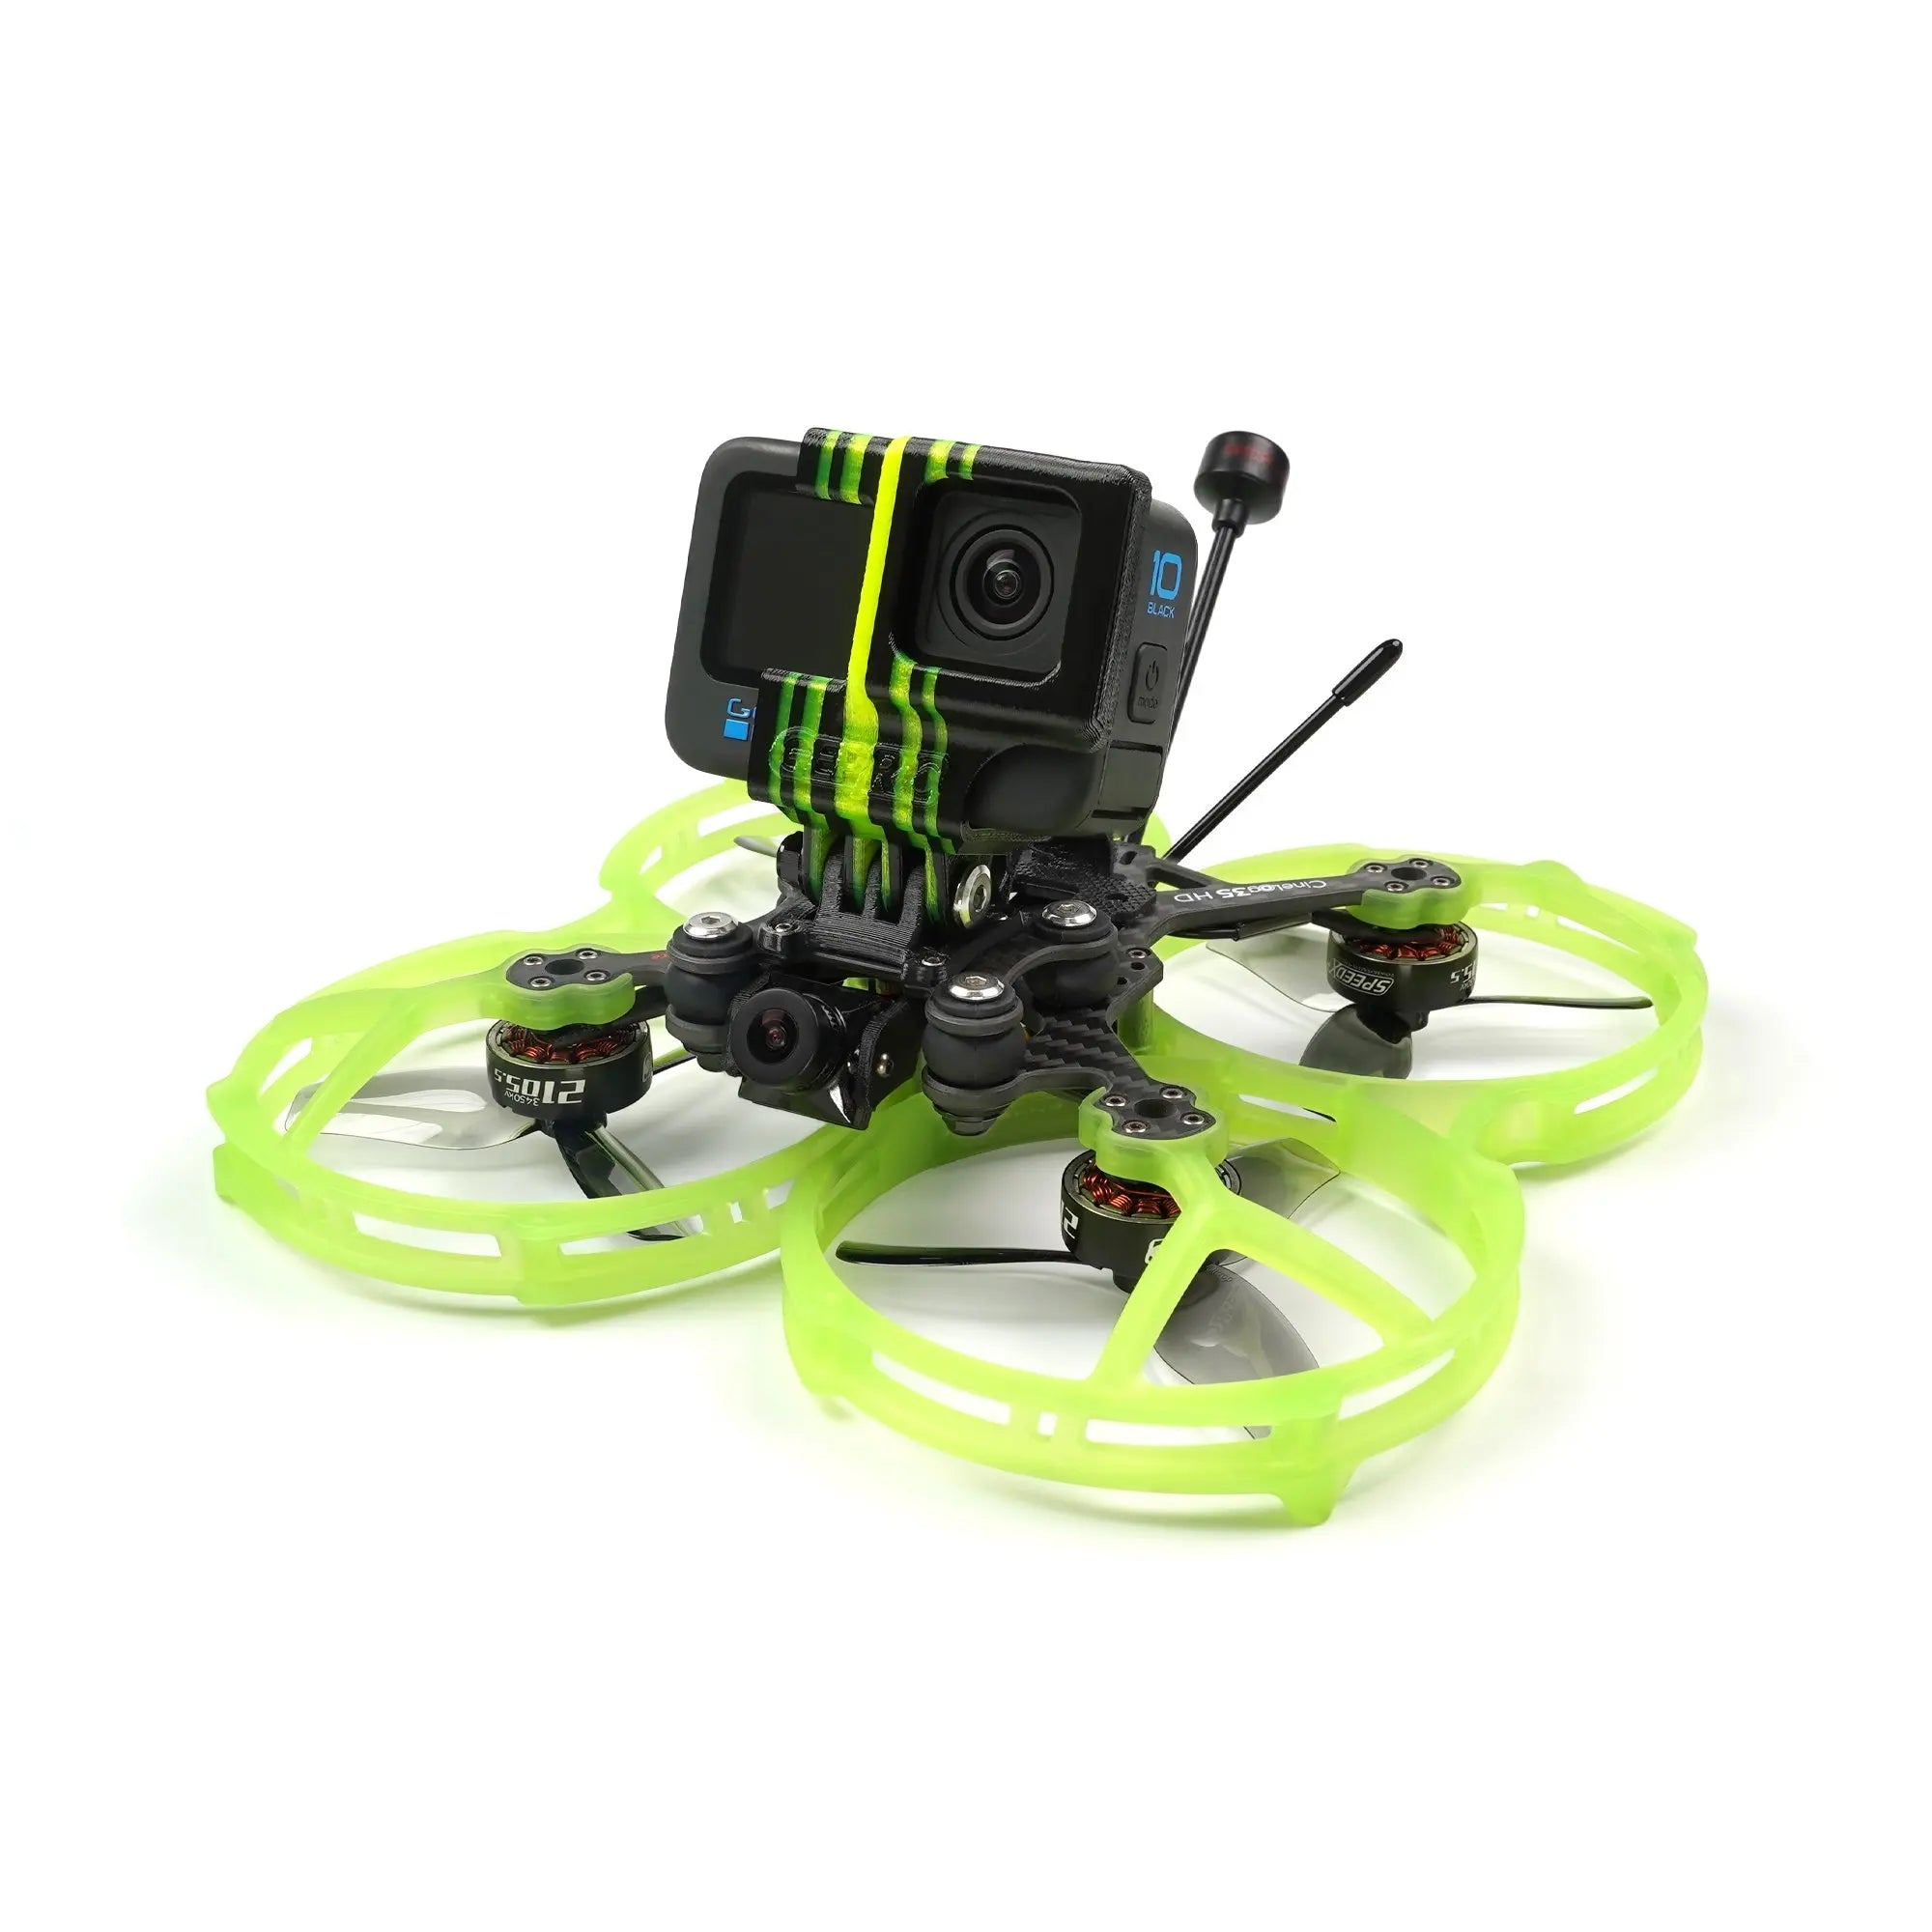 GEPRC CineLog35 Cinewhoop FPV Drone, FPV quad that combines Cinematic shooting, Freestyle, Racing and Cruising 